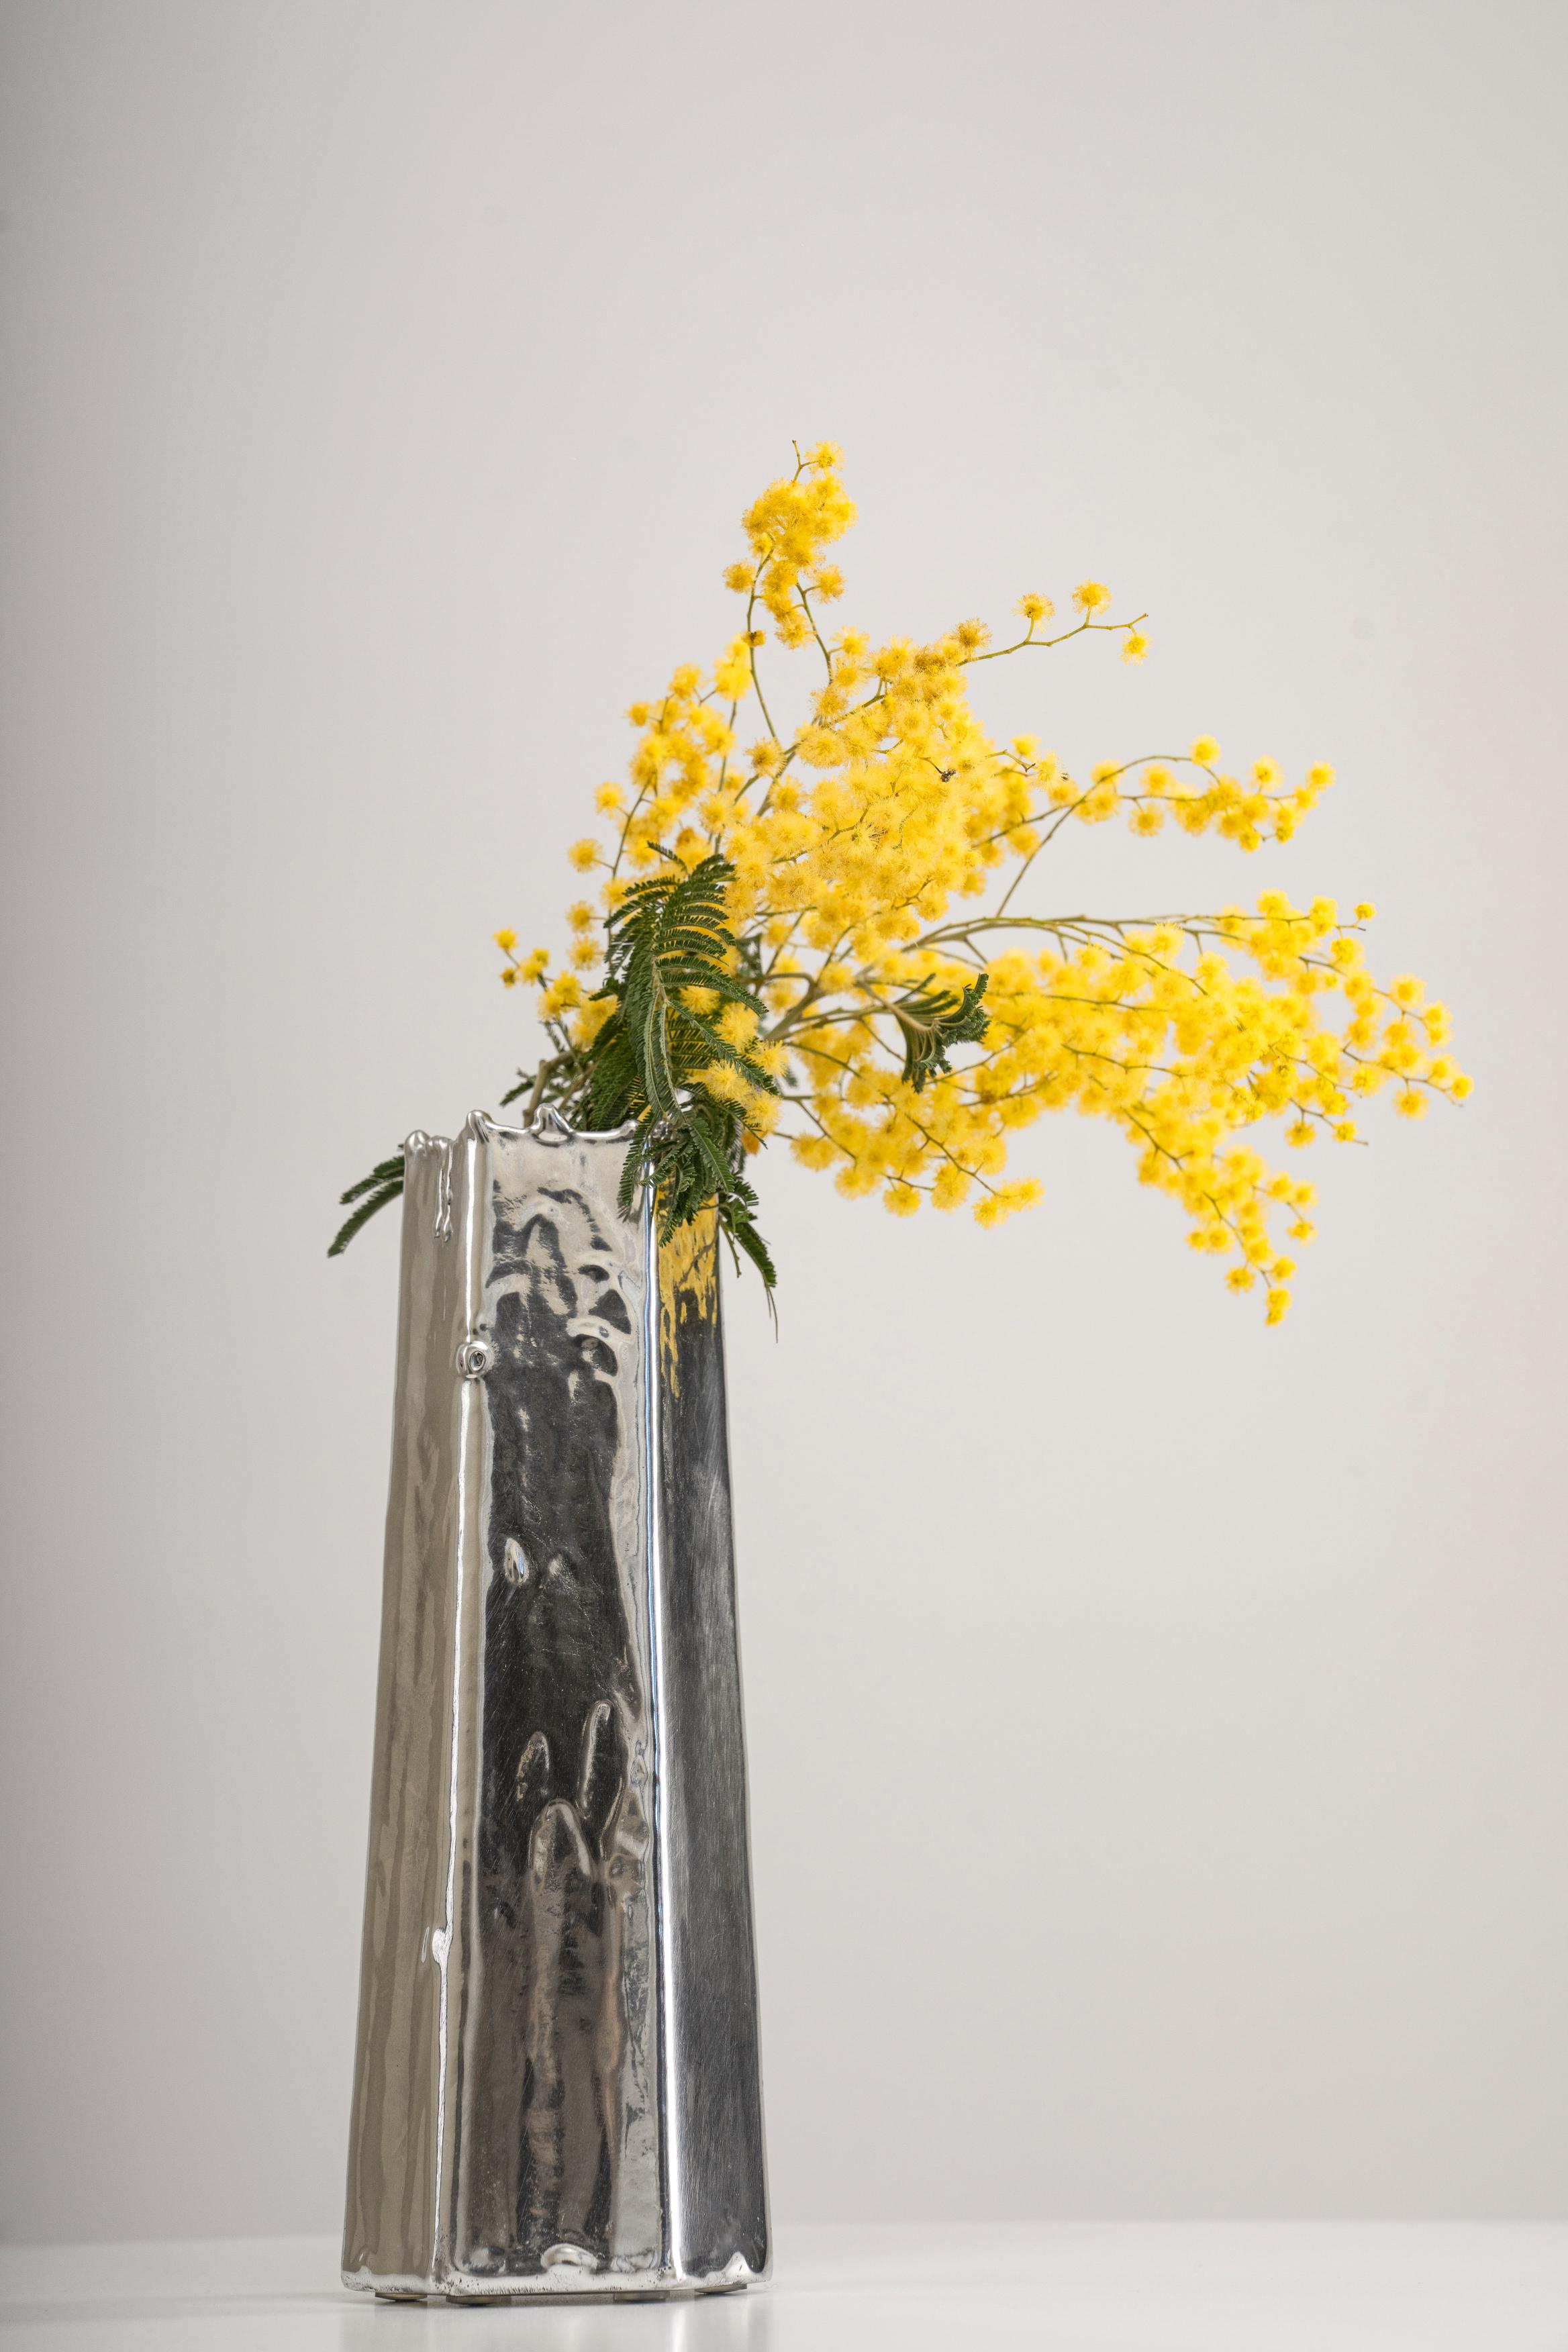 Lost Vase 6 by Studio Birtane
Dimensions:  W 8 x D 8 x H 22 cm
Materials: Cast Aluminium
Cast Bronze version and Polished or Patinated finishes are also available.

All our lamps can be wired according to each country. If sold to the USA it will be